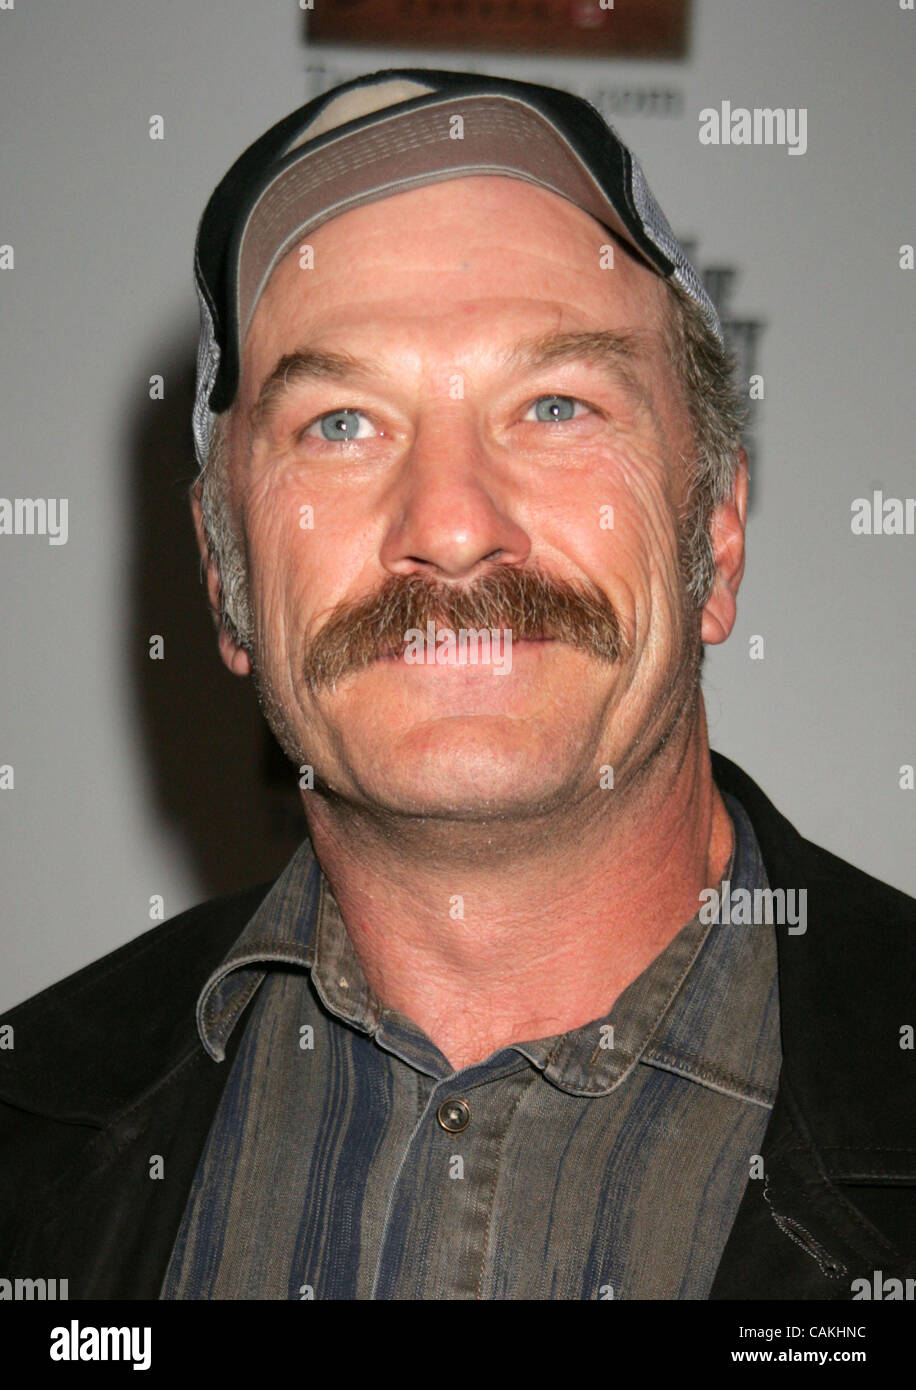 Sep 18, 2007 - New York, NY, USA -Actor TED LEVINE at the arrivals of the New York premiere of 'The Assassination of Jesse James by the Coward Robert Ford' held at the Ziegfeld Theater. (Credit Image: © Nancy Kaszerman/ZUMA Press) Stock Photo